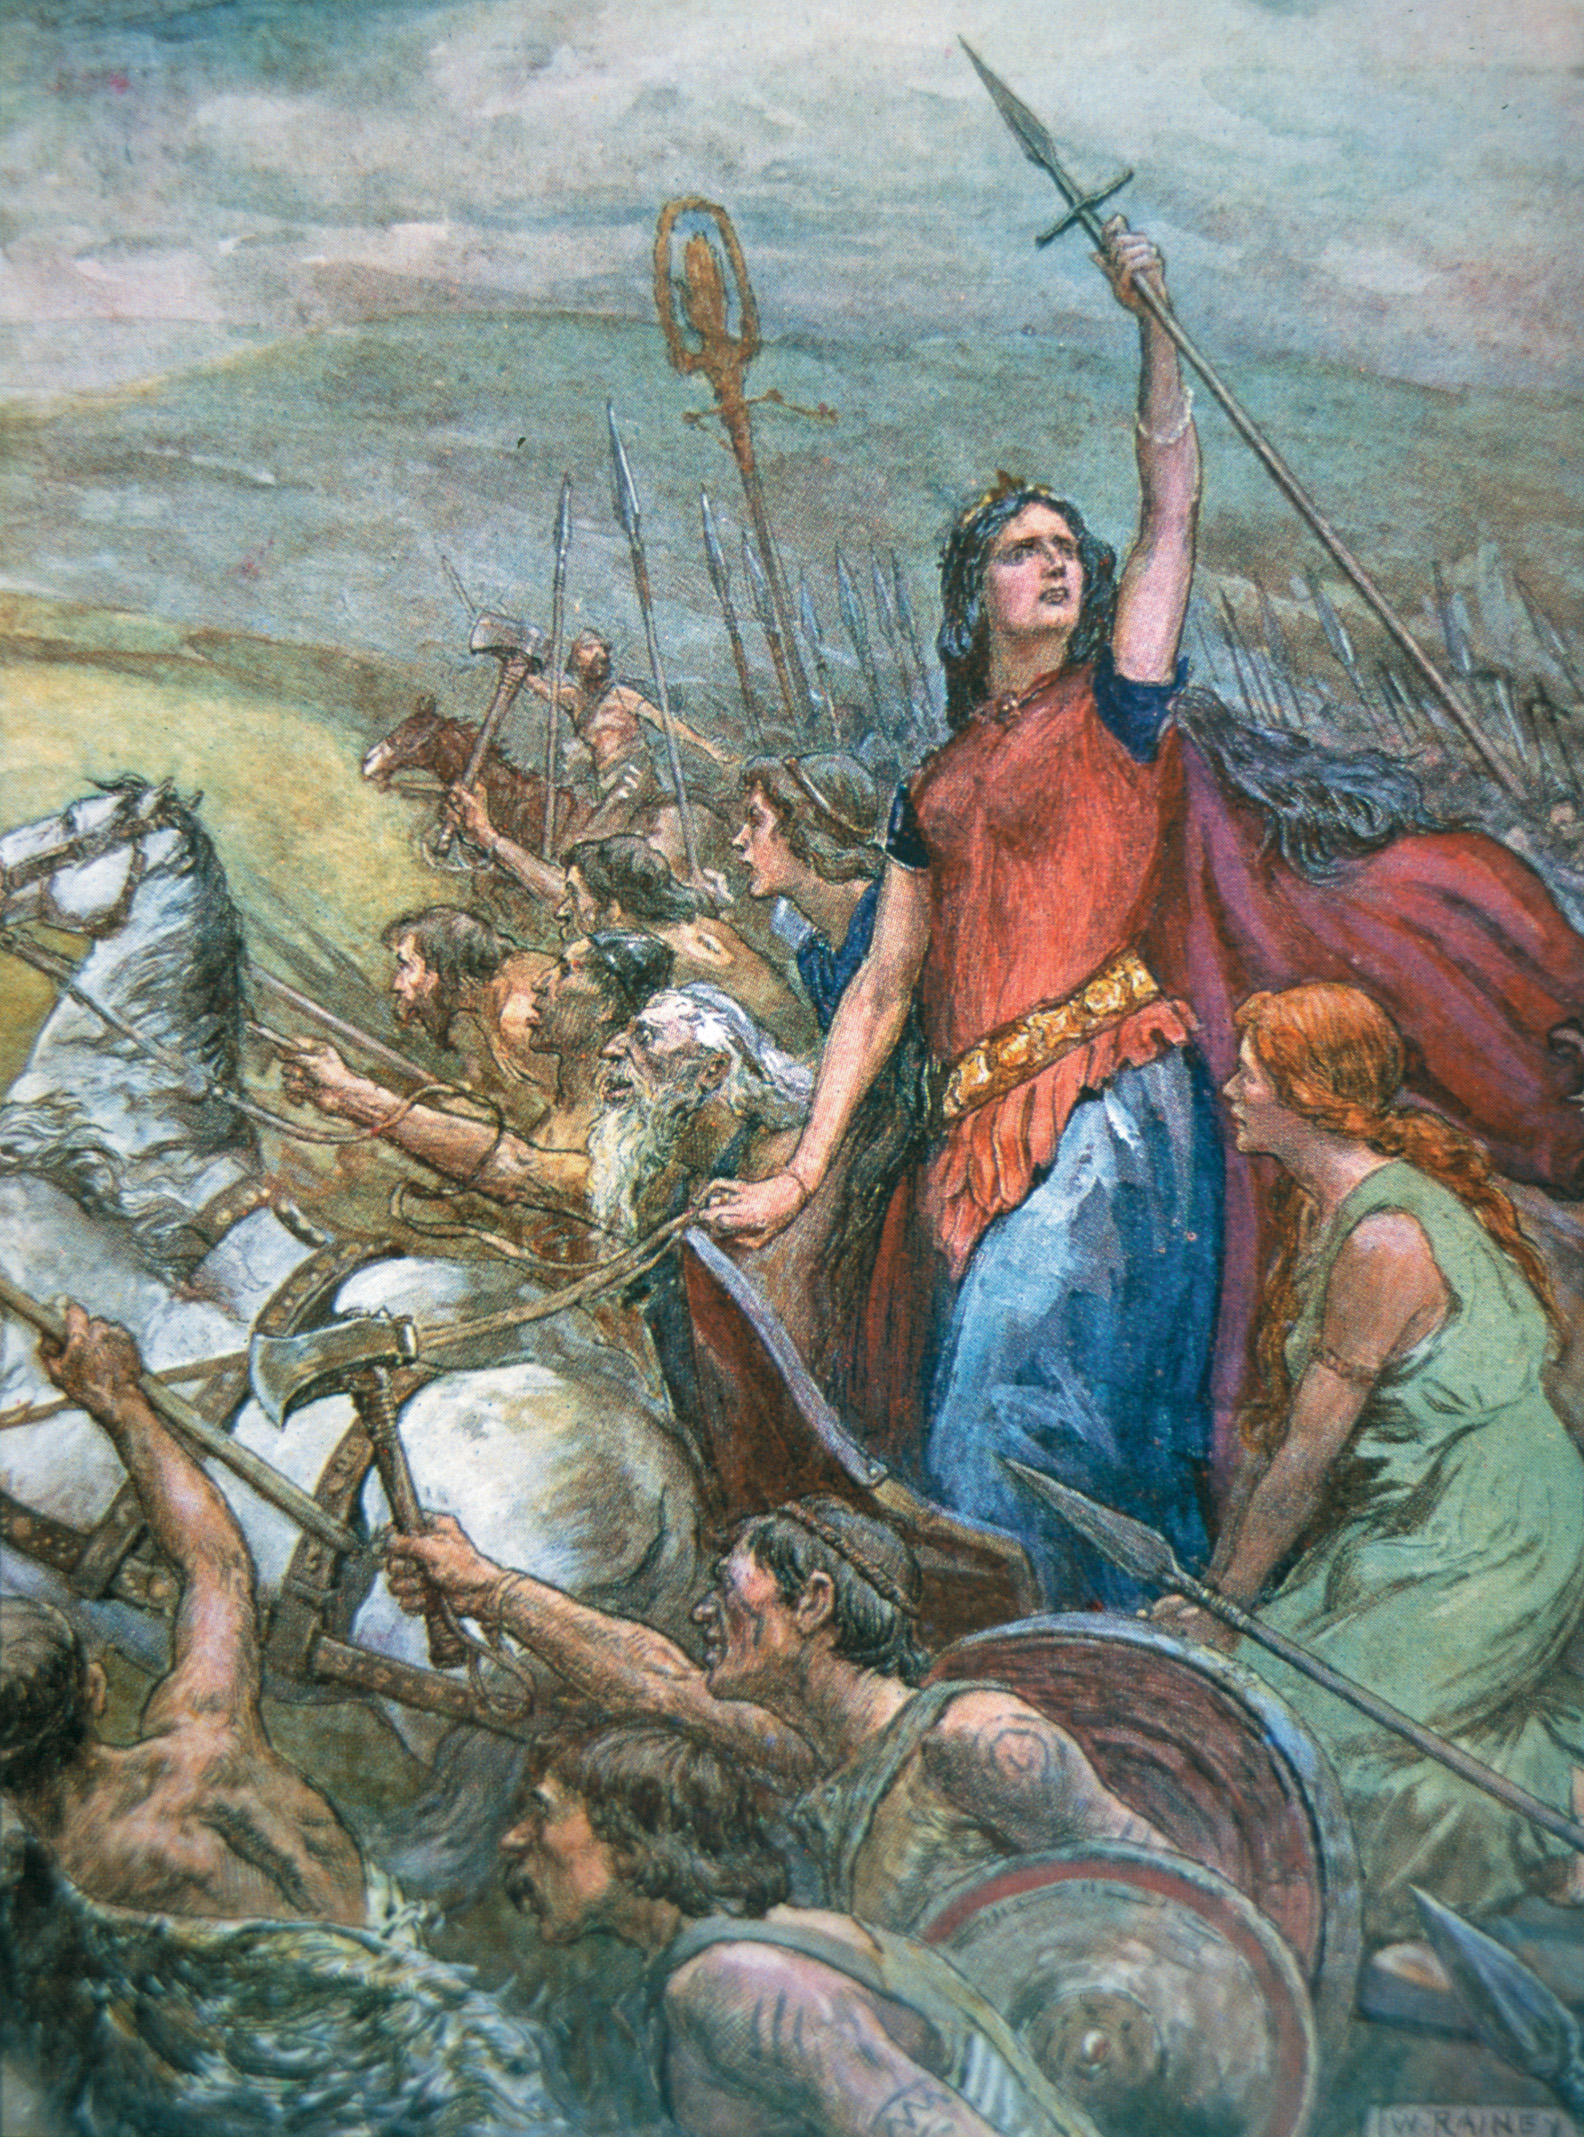 Queen Boudicca, her daughters beside her in her chariot, urges Britons into the final battle. Across the way, Roman legionaries stood shoulder to shoulder behind their shields.